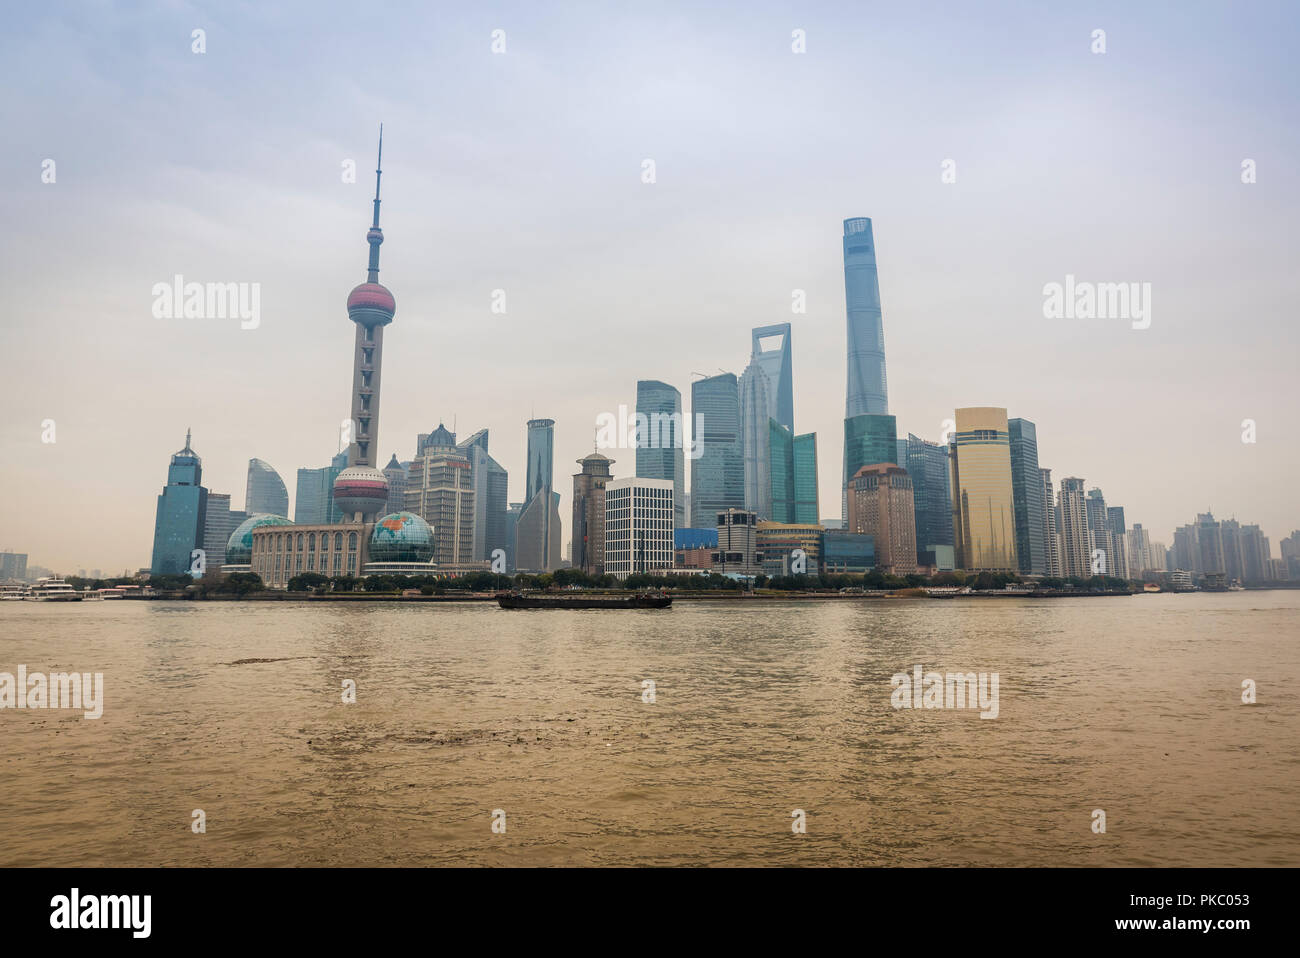 Pudong skyline with its landmark skyscrapers seen from the opposite side of the Huangpu river; Shanghai, China Stock Photo